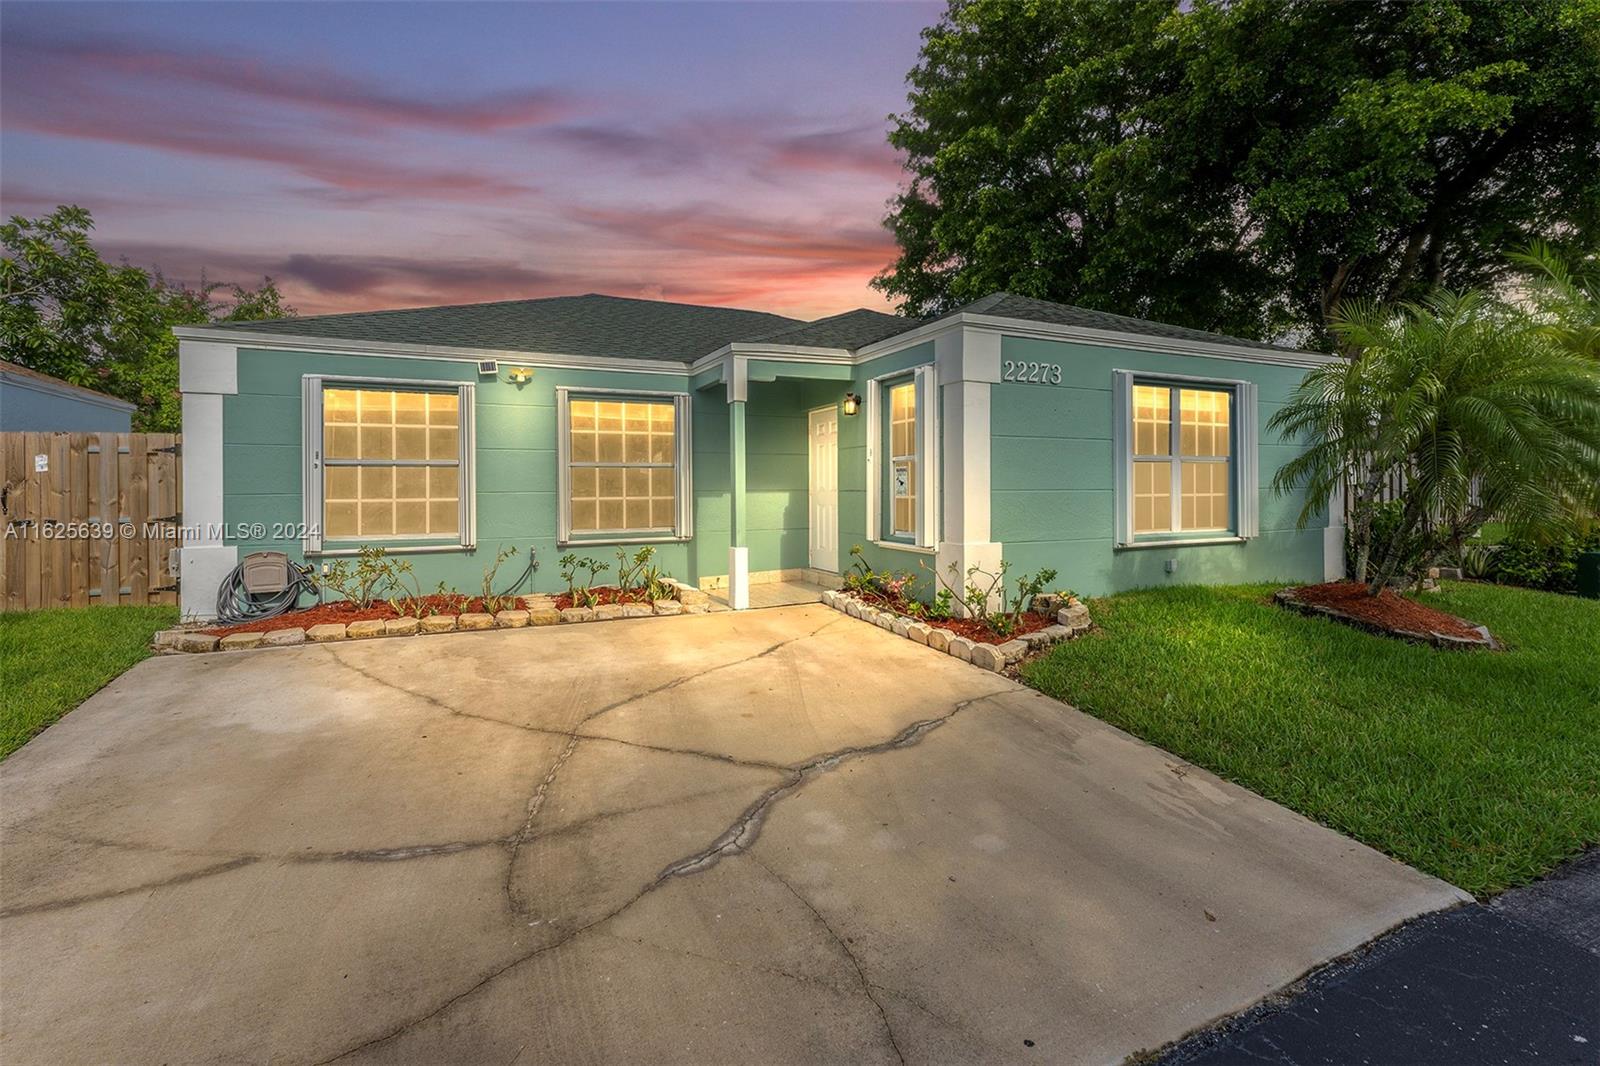 Welcome to your future home in the coveted Catalina community of Cutler Bay! This charming, one-story corner home features 3 bedrooms, 2 bathrooms, and a spacious lot. The roof was replaced in 2018, ensuring peace of mind for years to come. Enjoy the convenience of accordion shutters on all windows, and the elegance of porcelain tile flooring. The modern kitchen boasts marble countertops and stainless steel appliances. Residents enjoy a low HOA fee of $455/quarterly, granting access to amenities such as tennis courts, a pool, and a playground. Strategically located just 7 minutes from the Turnpike US-1, you'll have easy access to nearby restaurants and supermarkets. Nestled in a private cul-de-sac, this home offers both privacy and convenience.